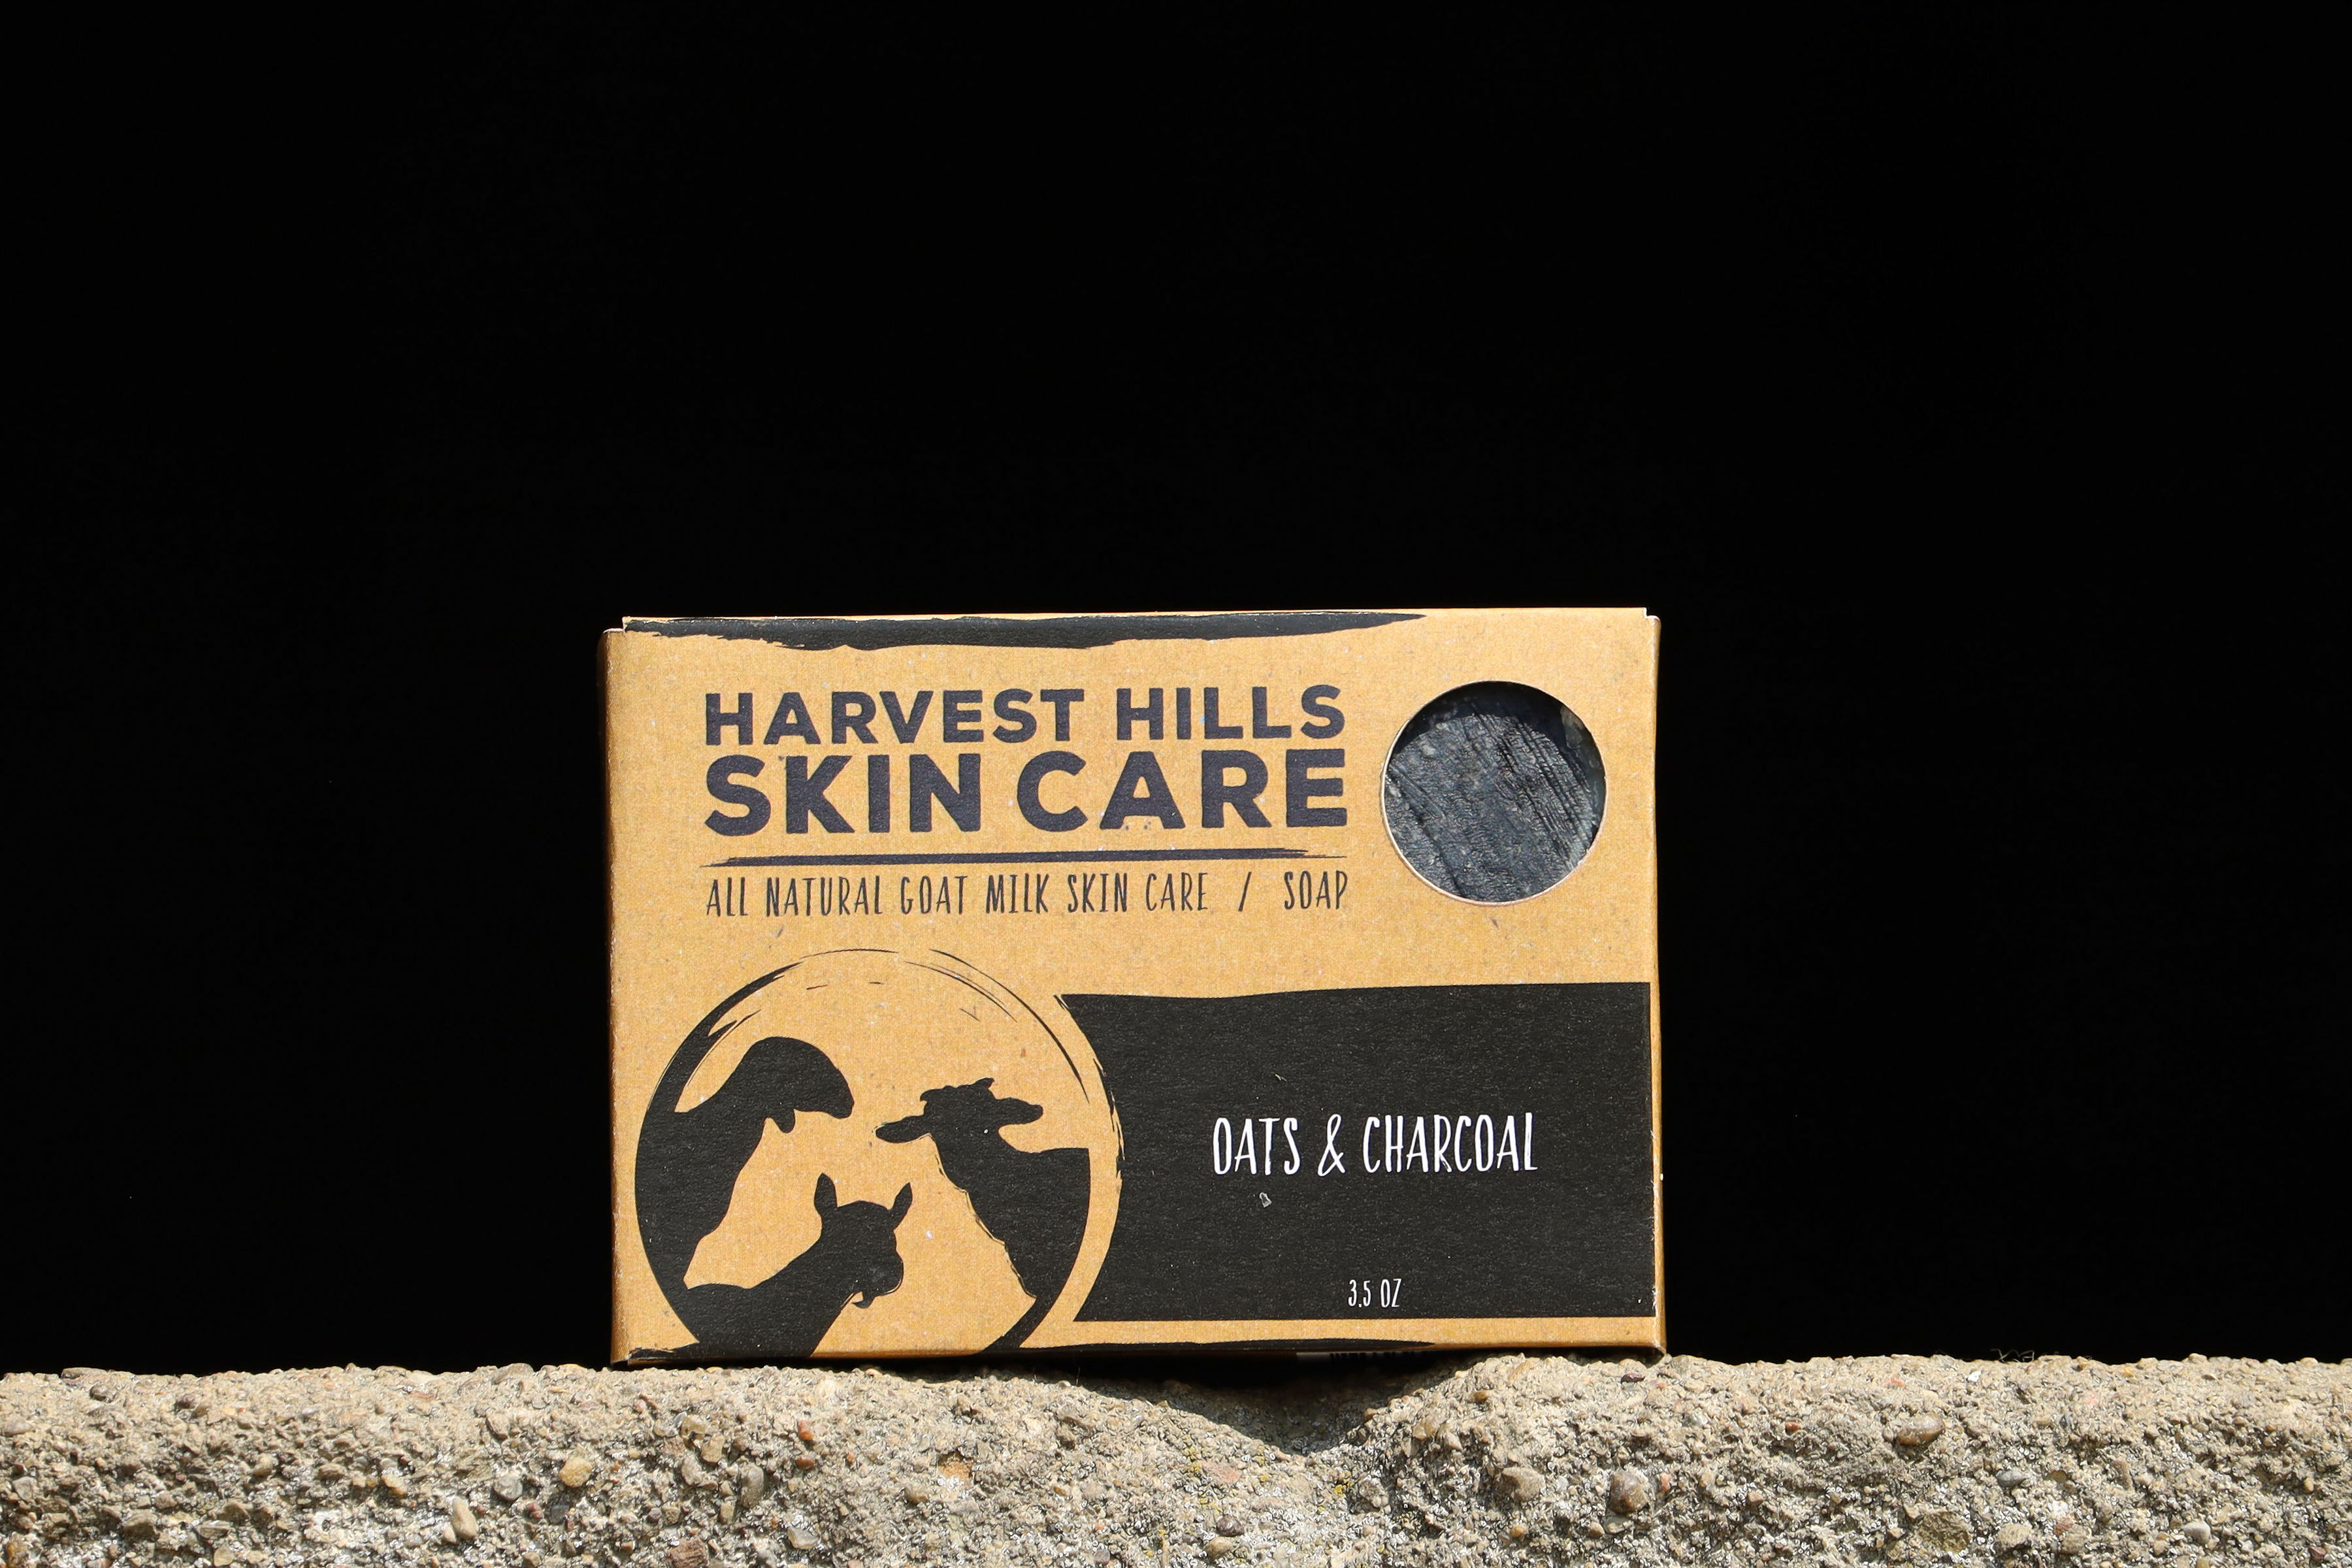 Oats and charcoal goat milk soap for oily skin and acne